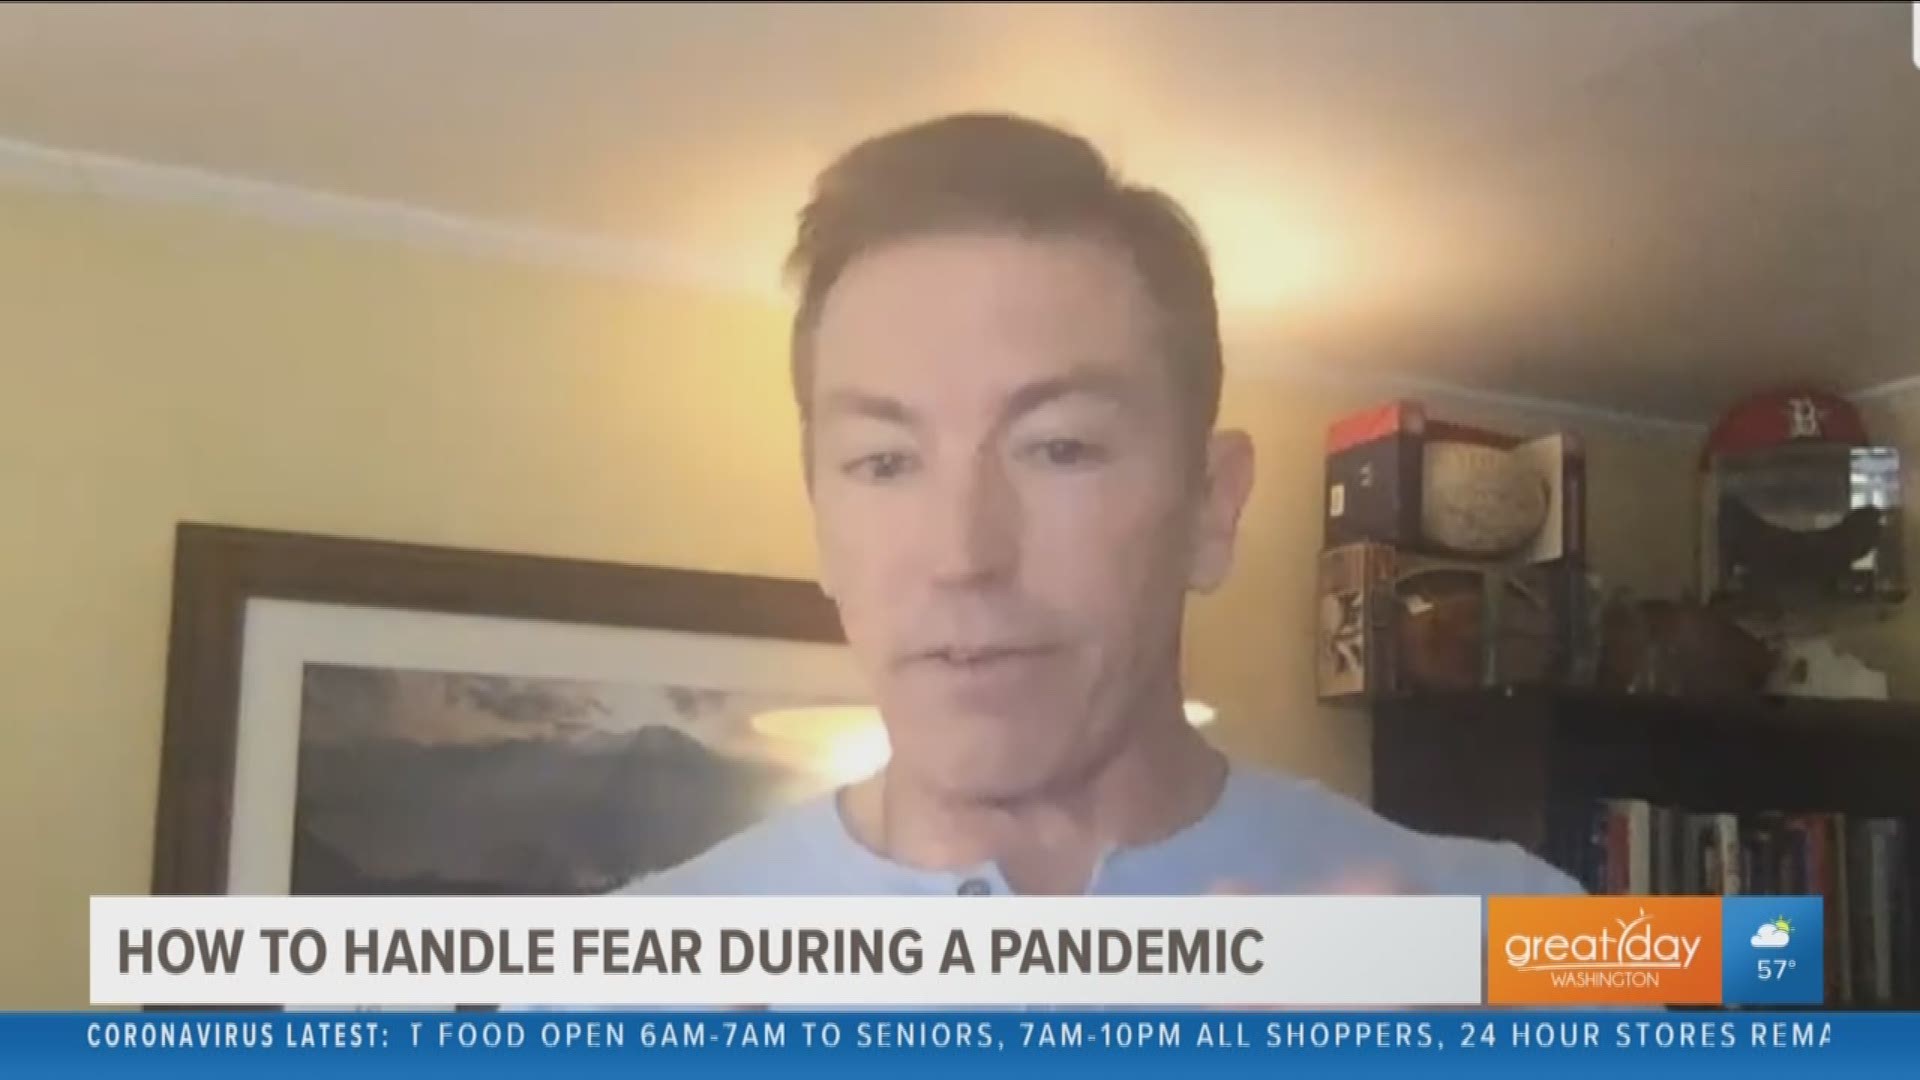 Author of "Fear is Fuel" Patrick Sweeney shares tips on how to manage fear during the coronavirus pandemic.